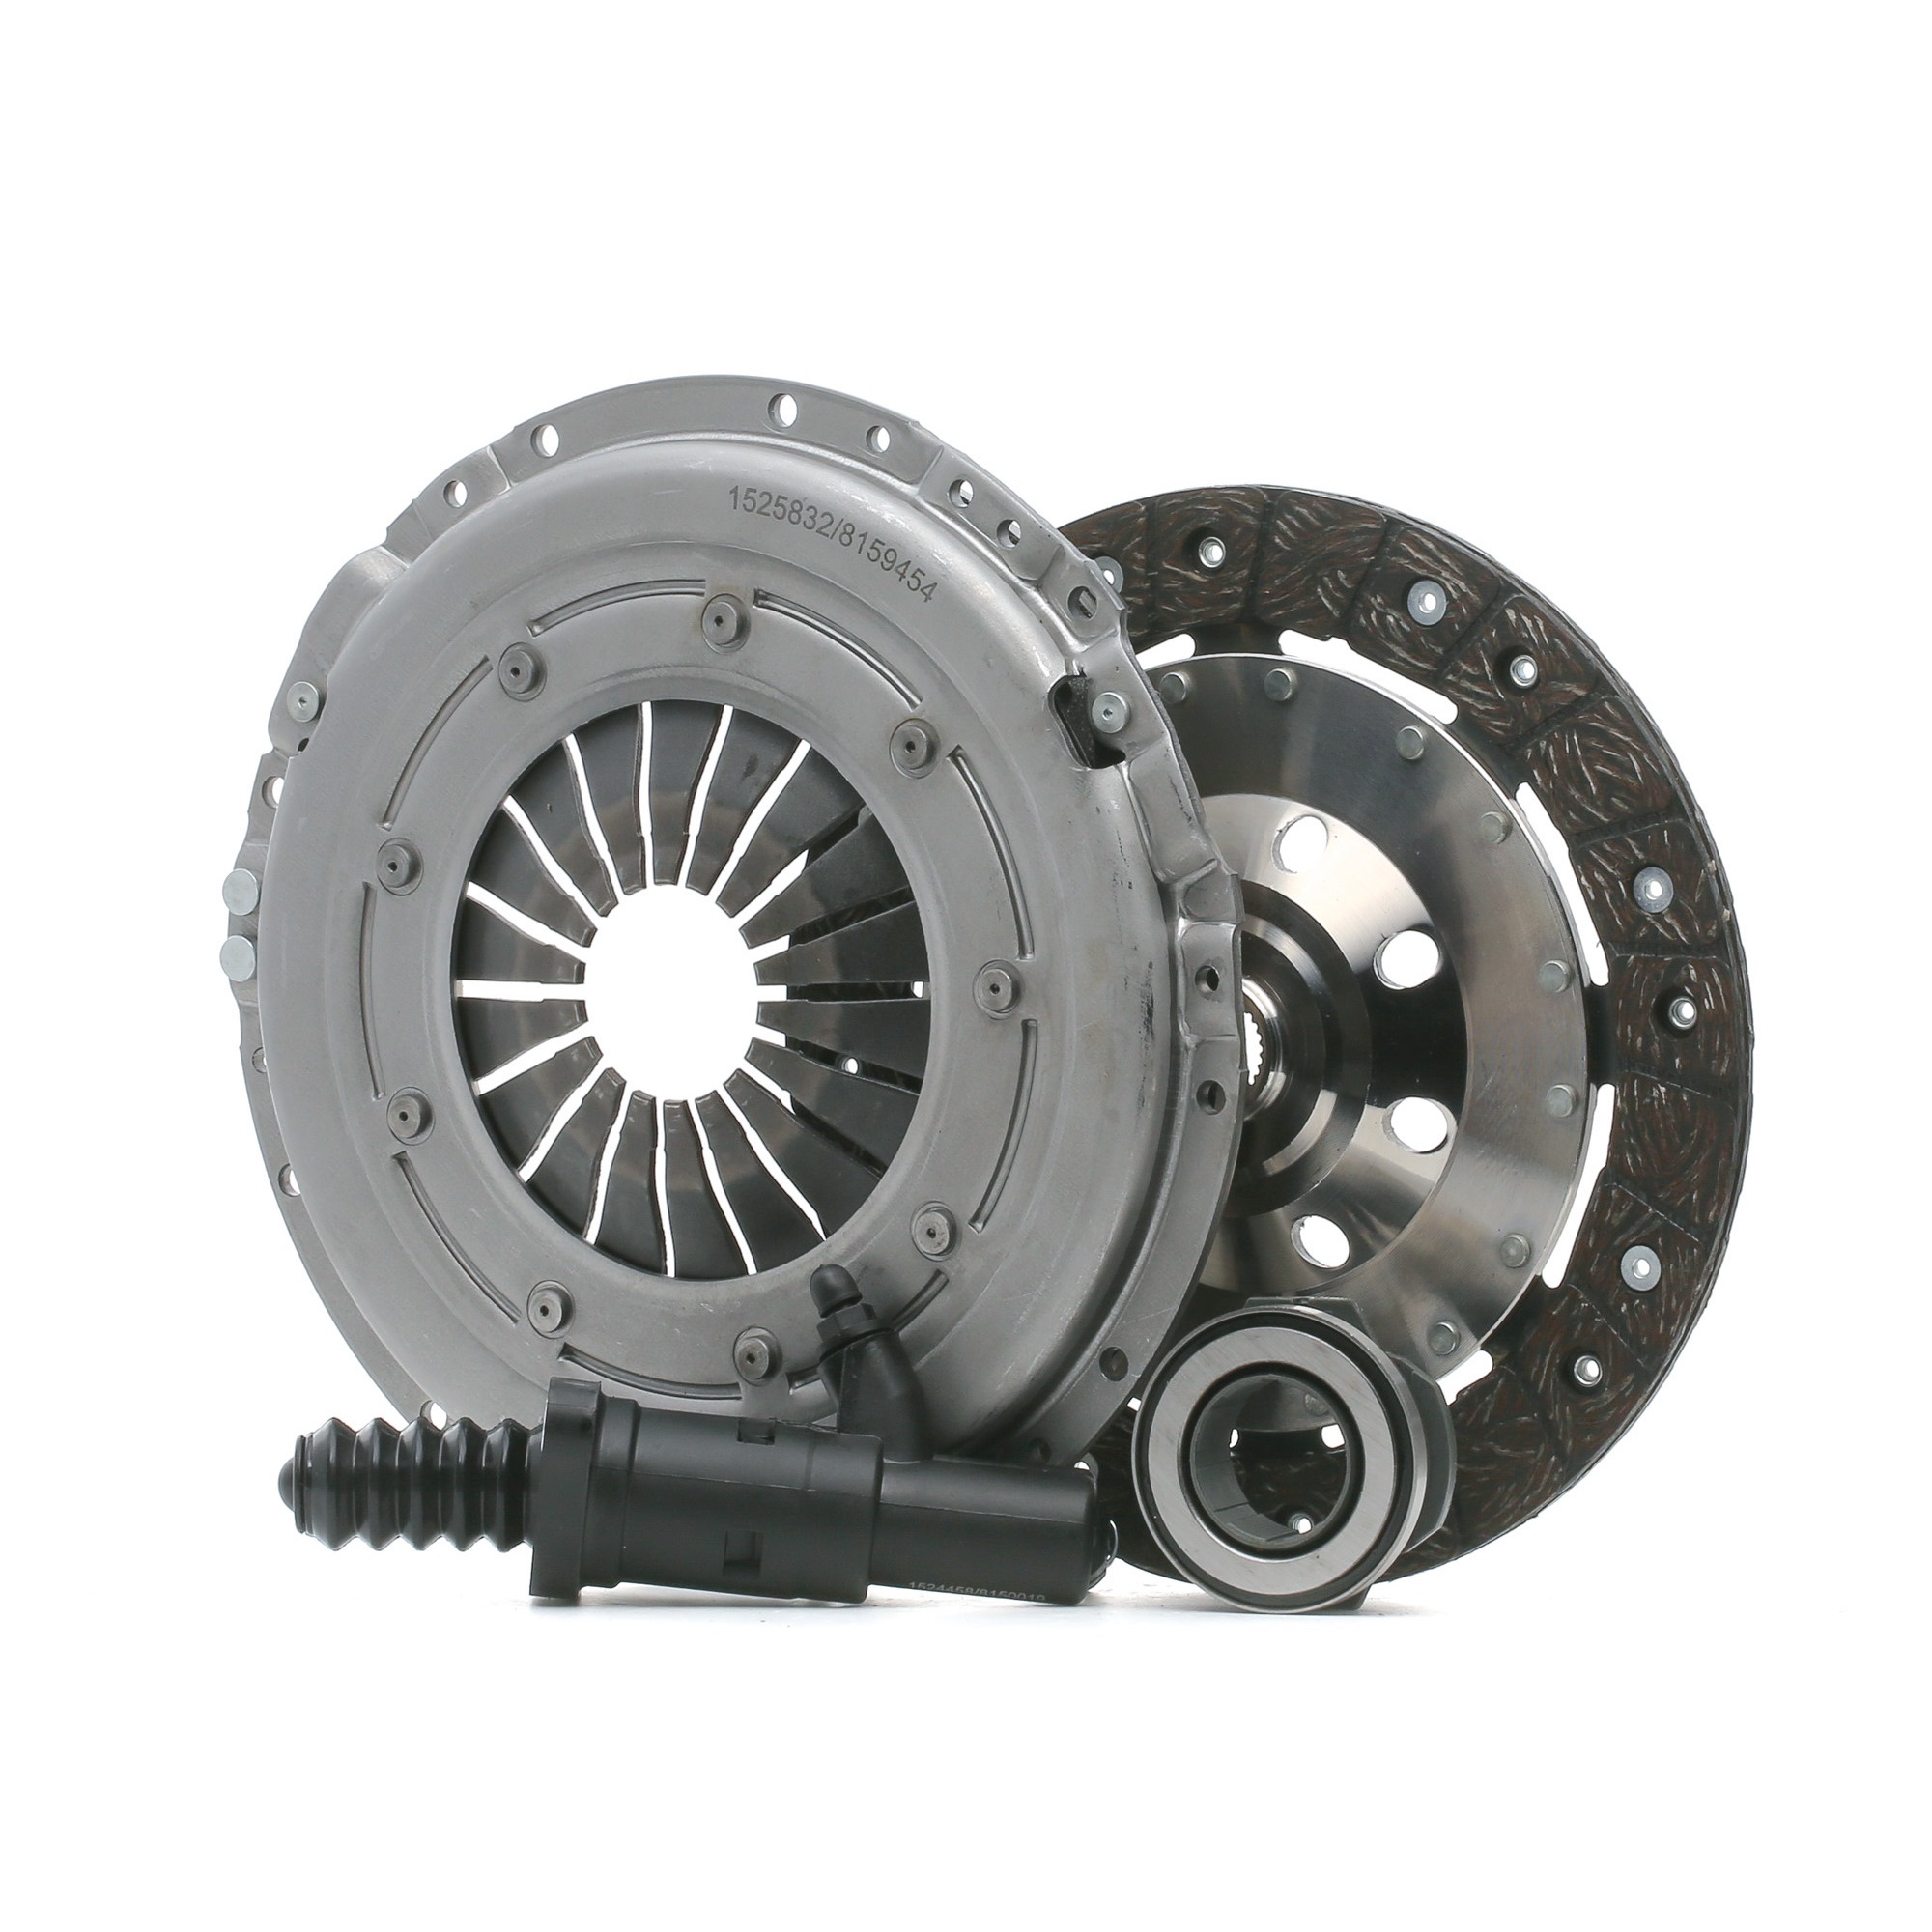 RIDEX 479C0723 Clutch kit for engines with dual-mass flywheel, with clutch release bearing, with clutch slave cylinder, Requires special tools for mounting, Check and replace dual-mass flywheel if necessary., with automatic adjustment, 230mm